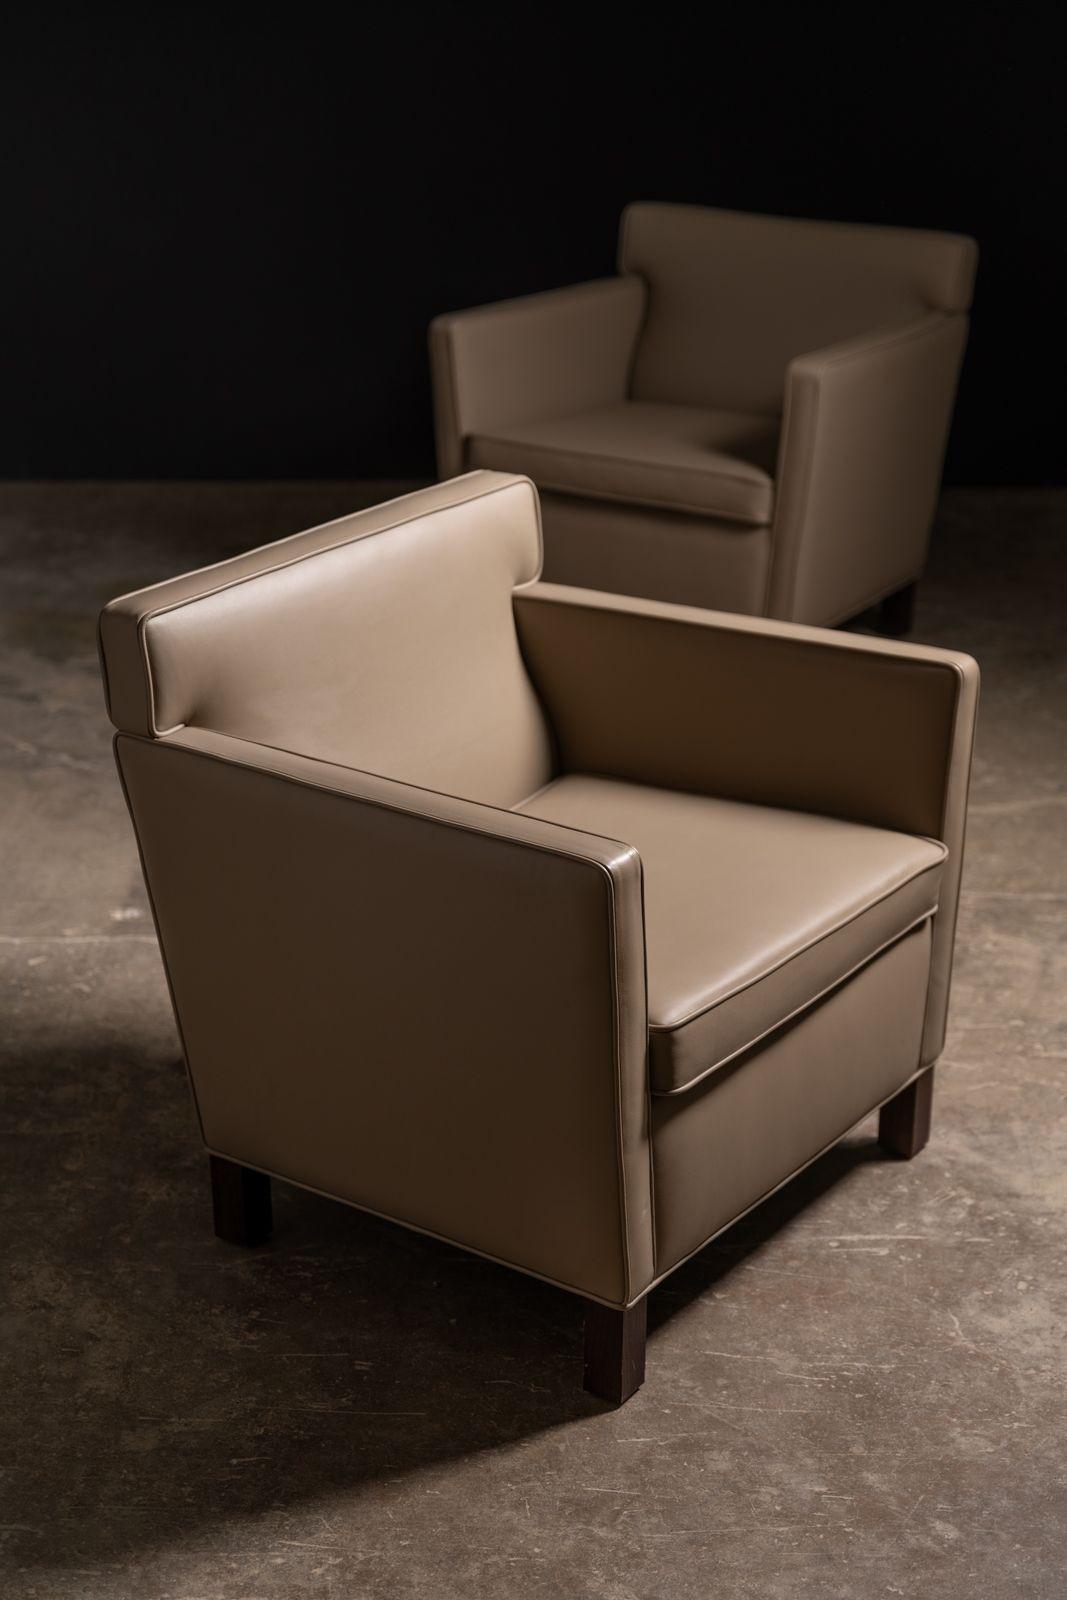 From the Krefeld Lounge Collection, a pair of Krefeld Loung Chairs designed by Mies van der Rohe. The Krefeld Collection was designed in 1927 while planning the Esters and Lange residence in Krefeld, Germany, and was developed in consultation with